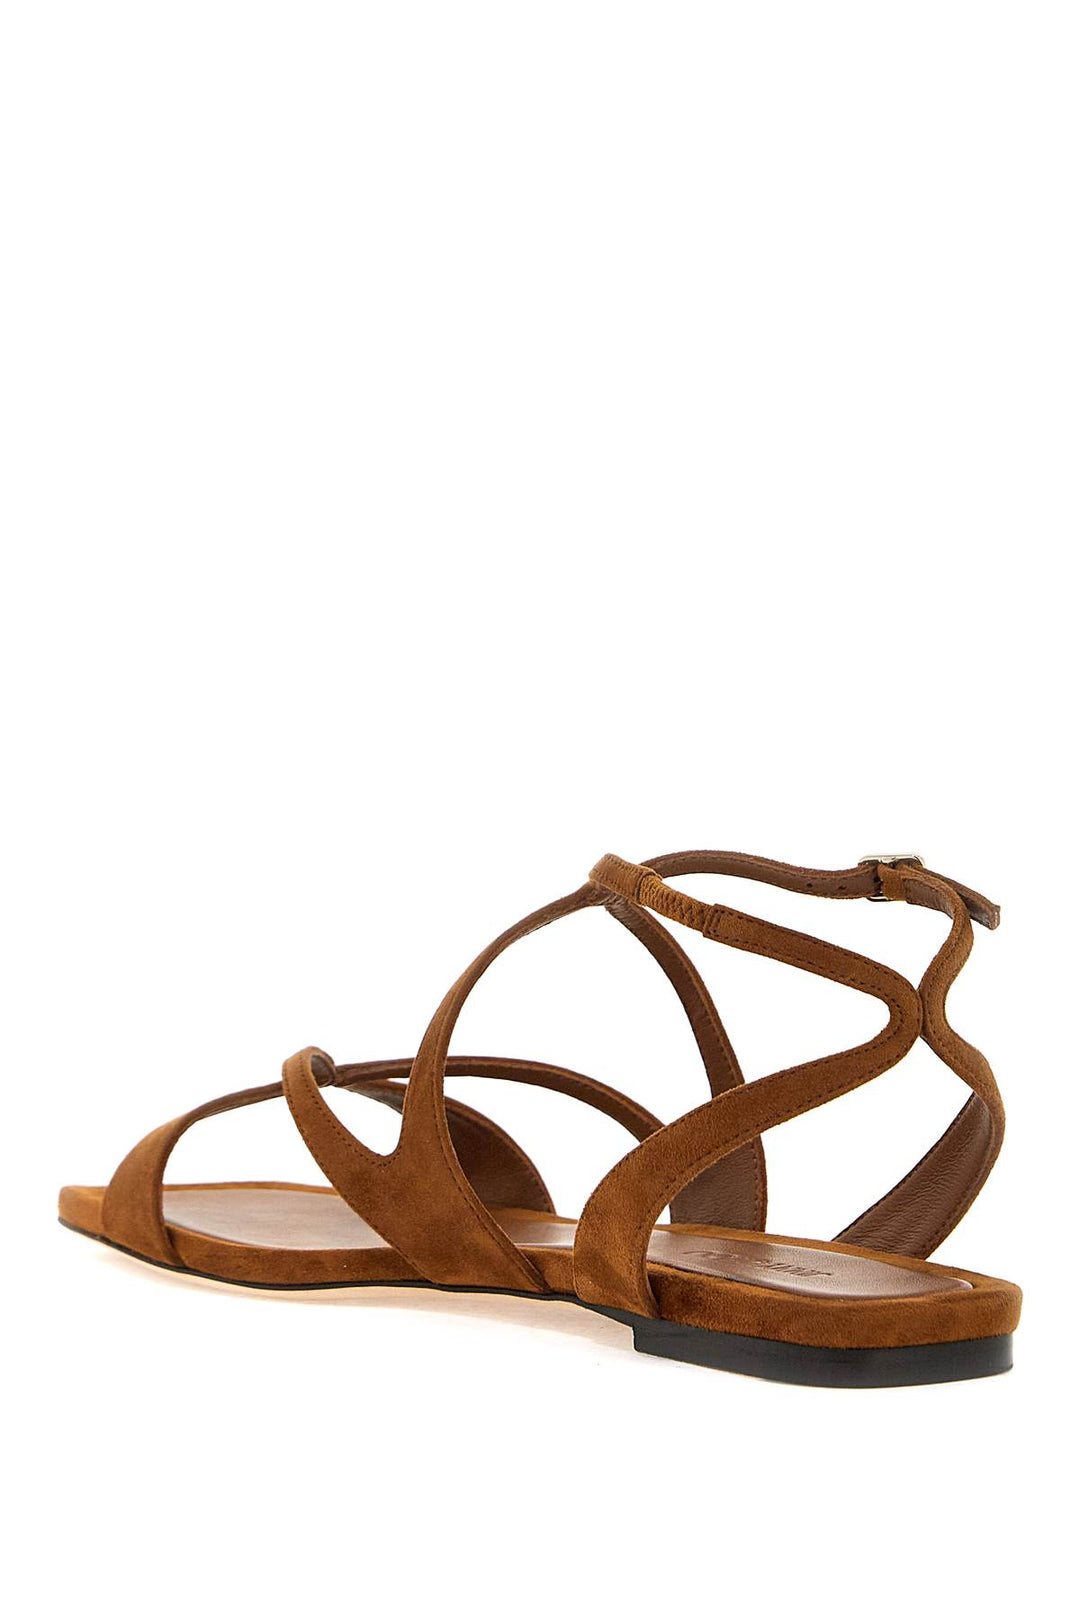 Jimmy Choo Ayla Flat Suede Leather Sandals   Brown